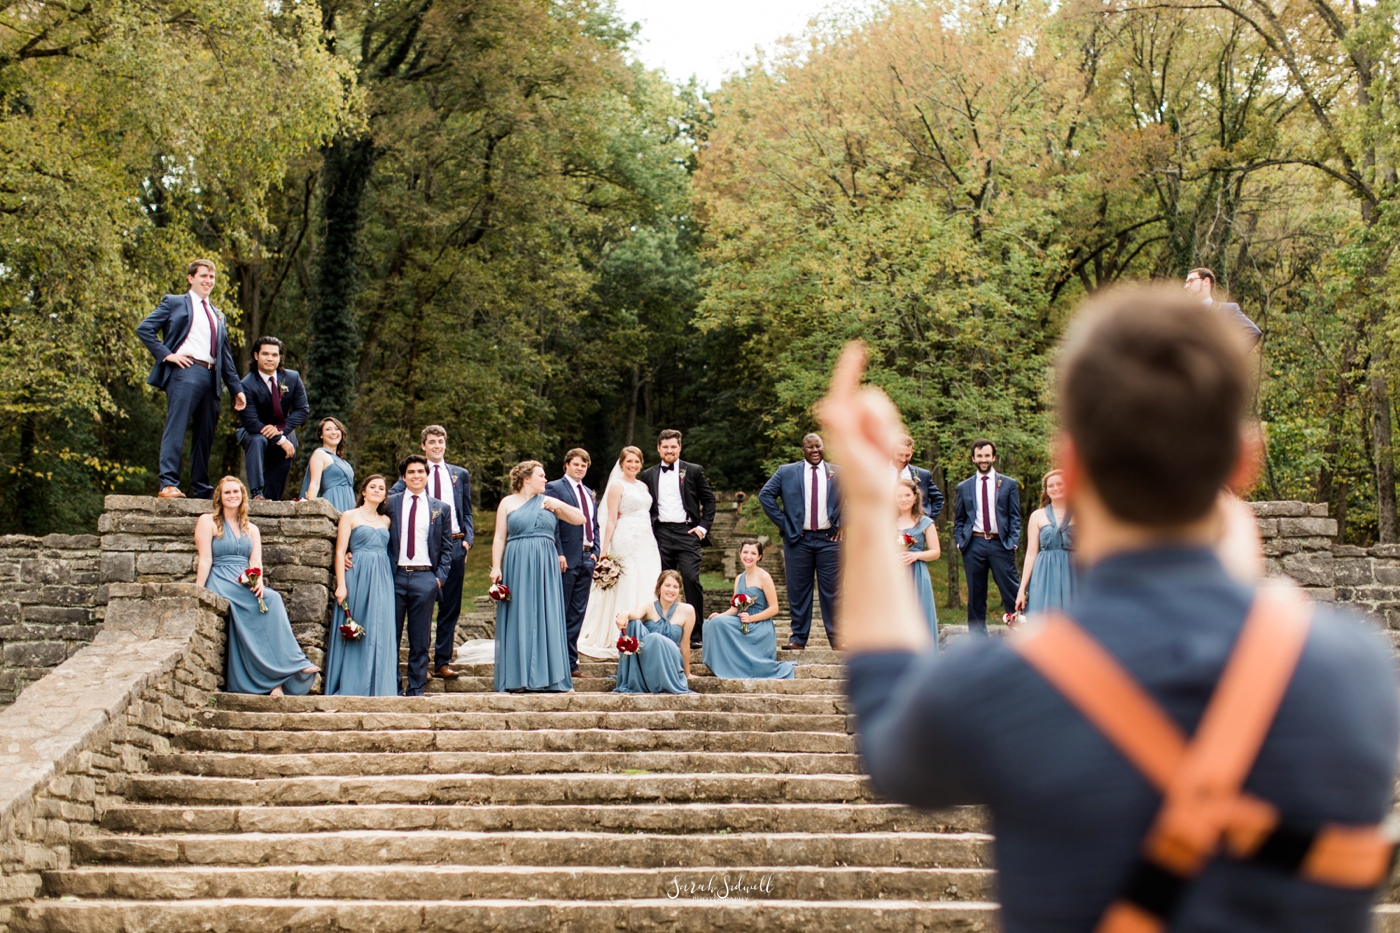 A photographer directs a wedding party to stand closer.